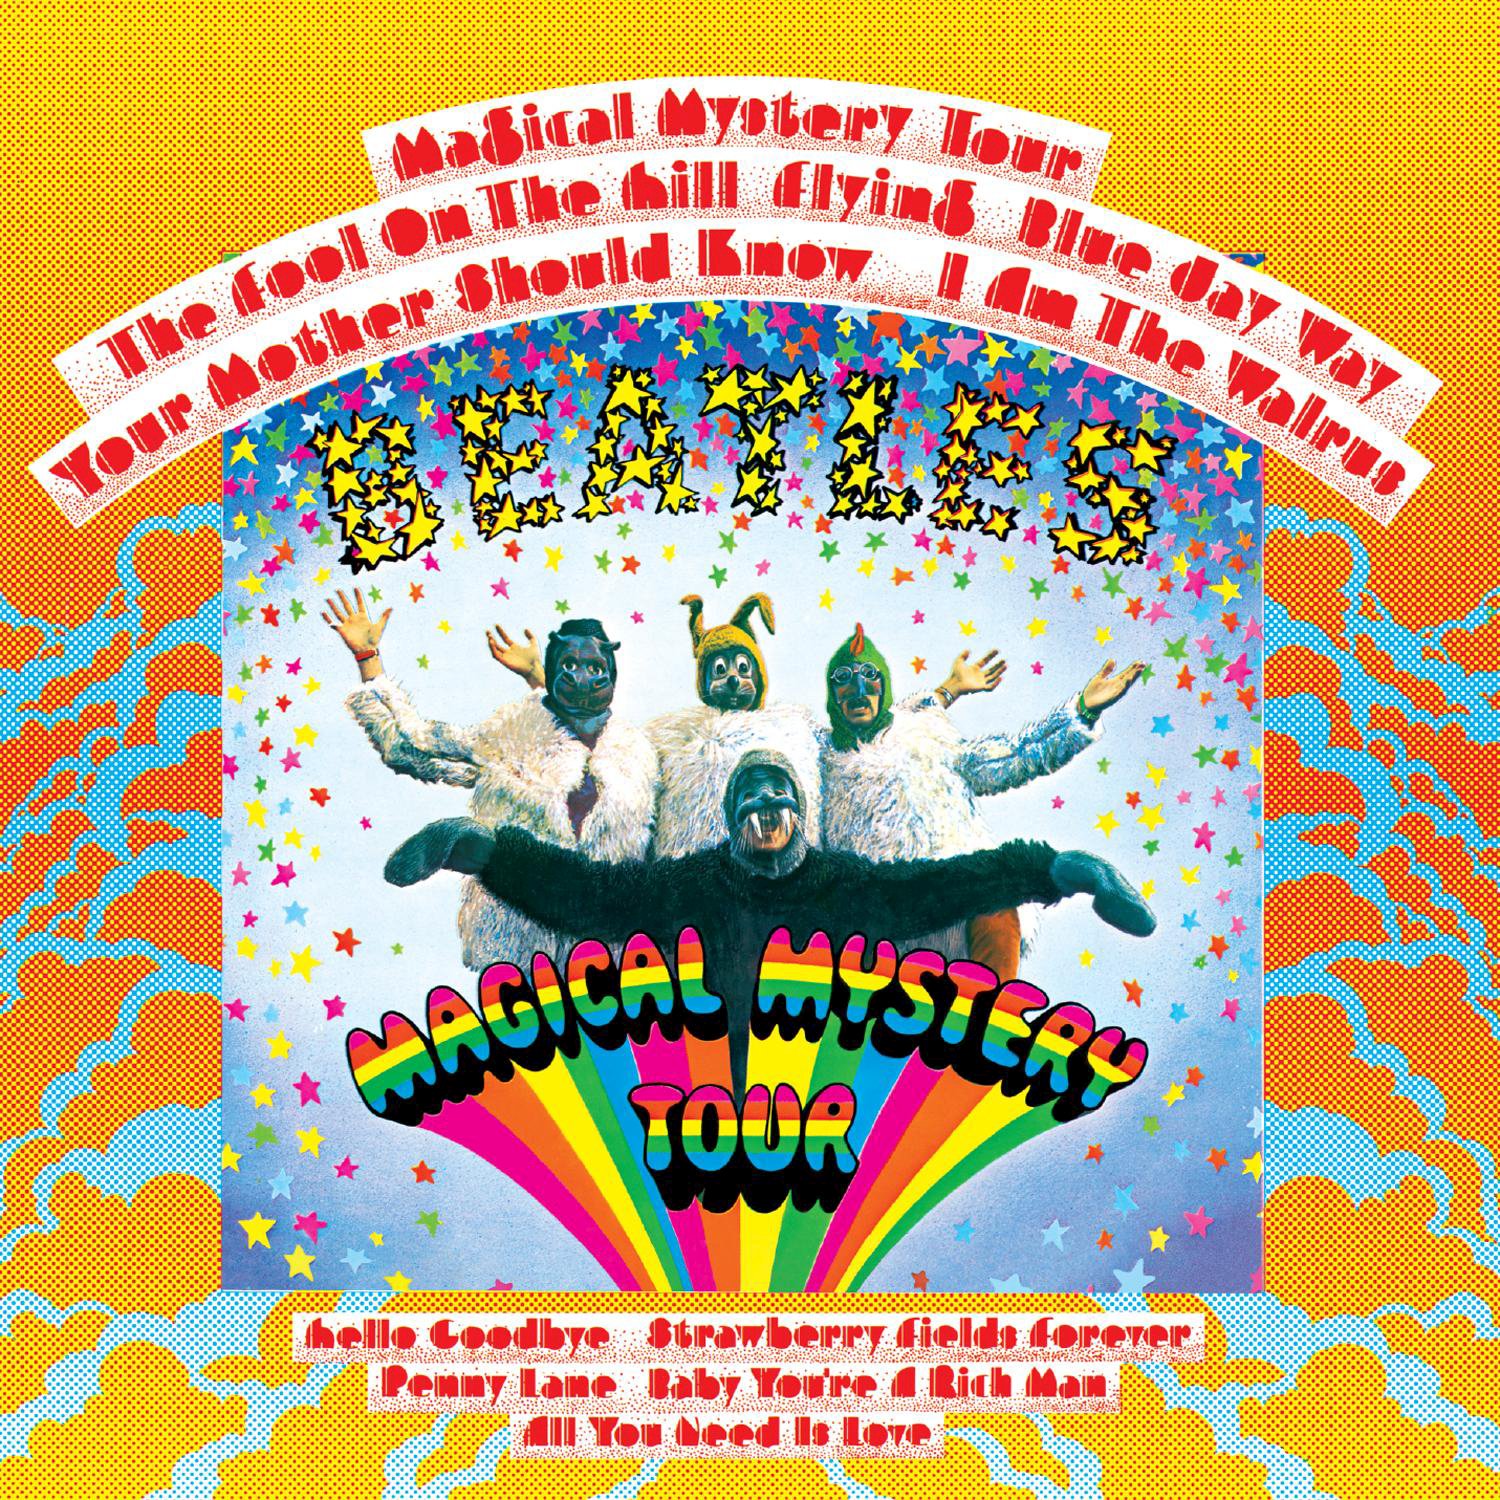 The Beatles-Magical Mystery Tour-(0094638246510)-REISSUE REMASTERED-LP-FLAC-2017-WRE Download